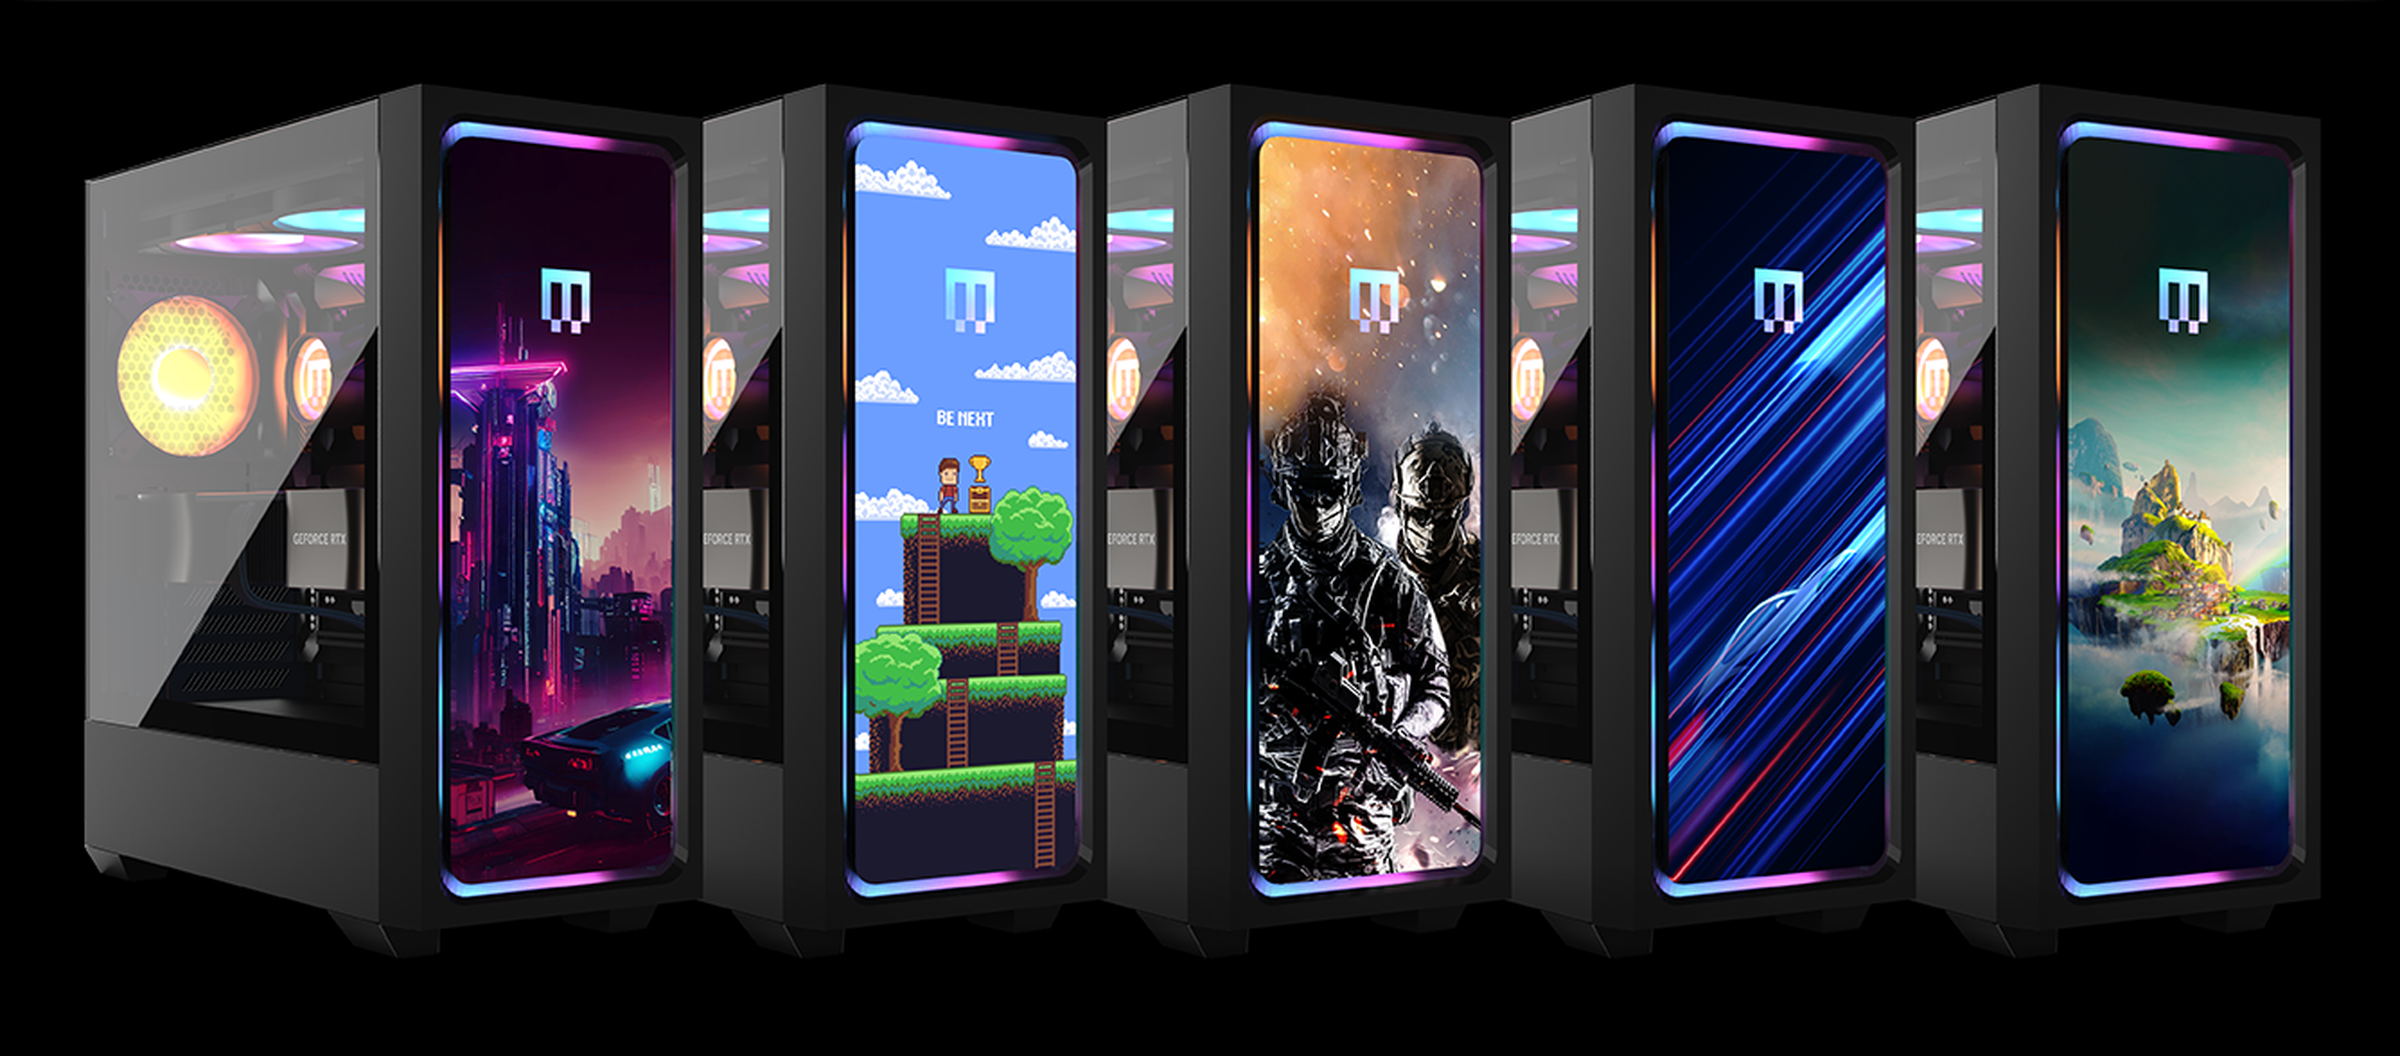 LED-backlit artwork glows bright from video game landscapes and cover art atop these swappable front panels.